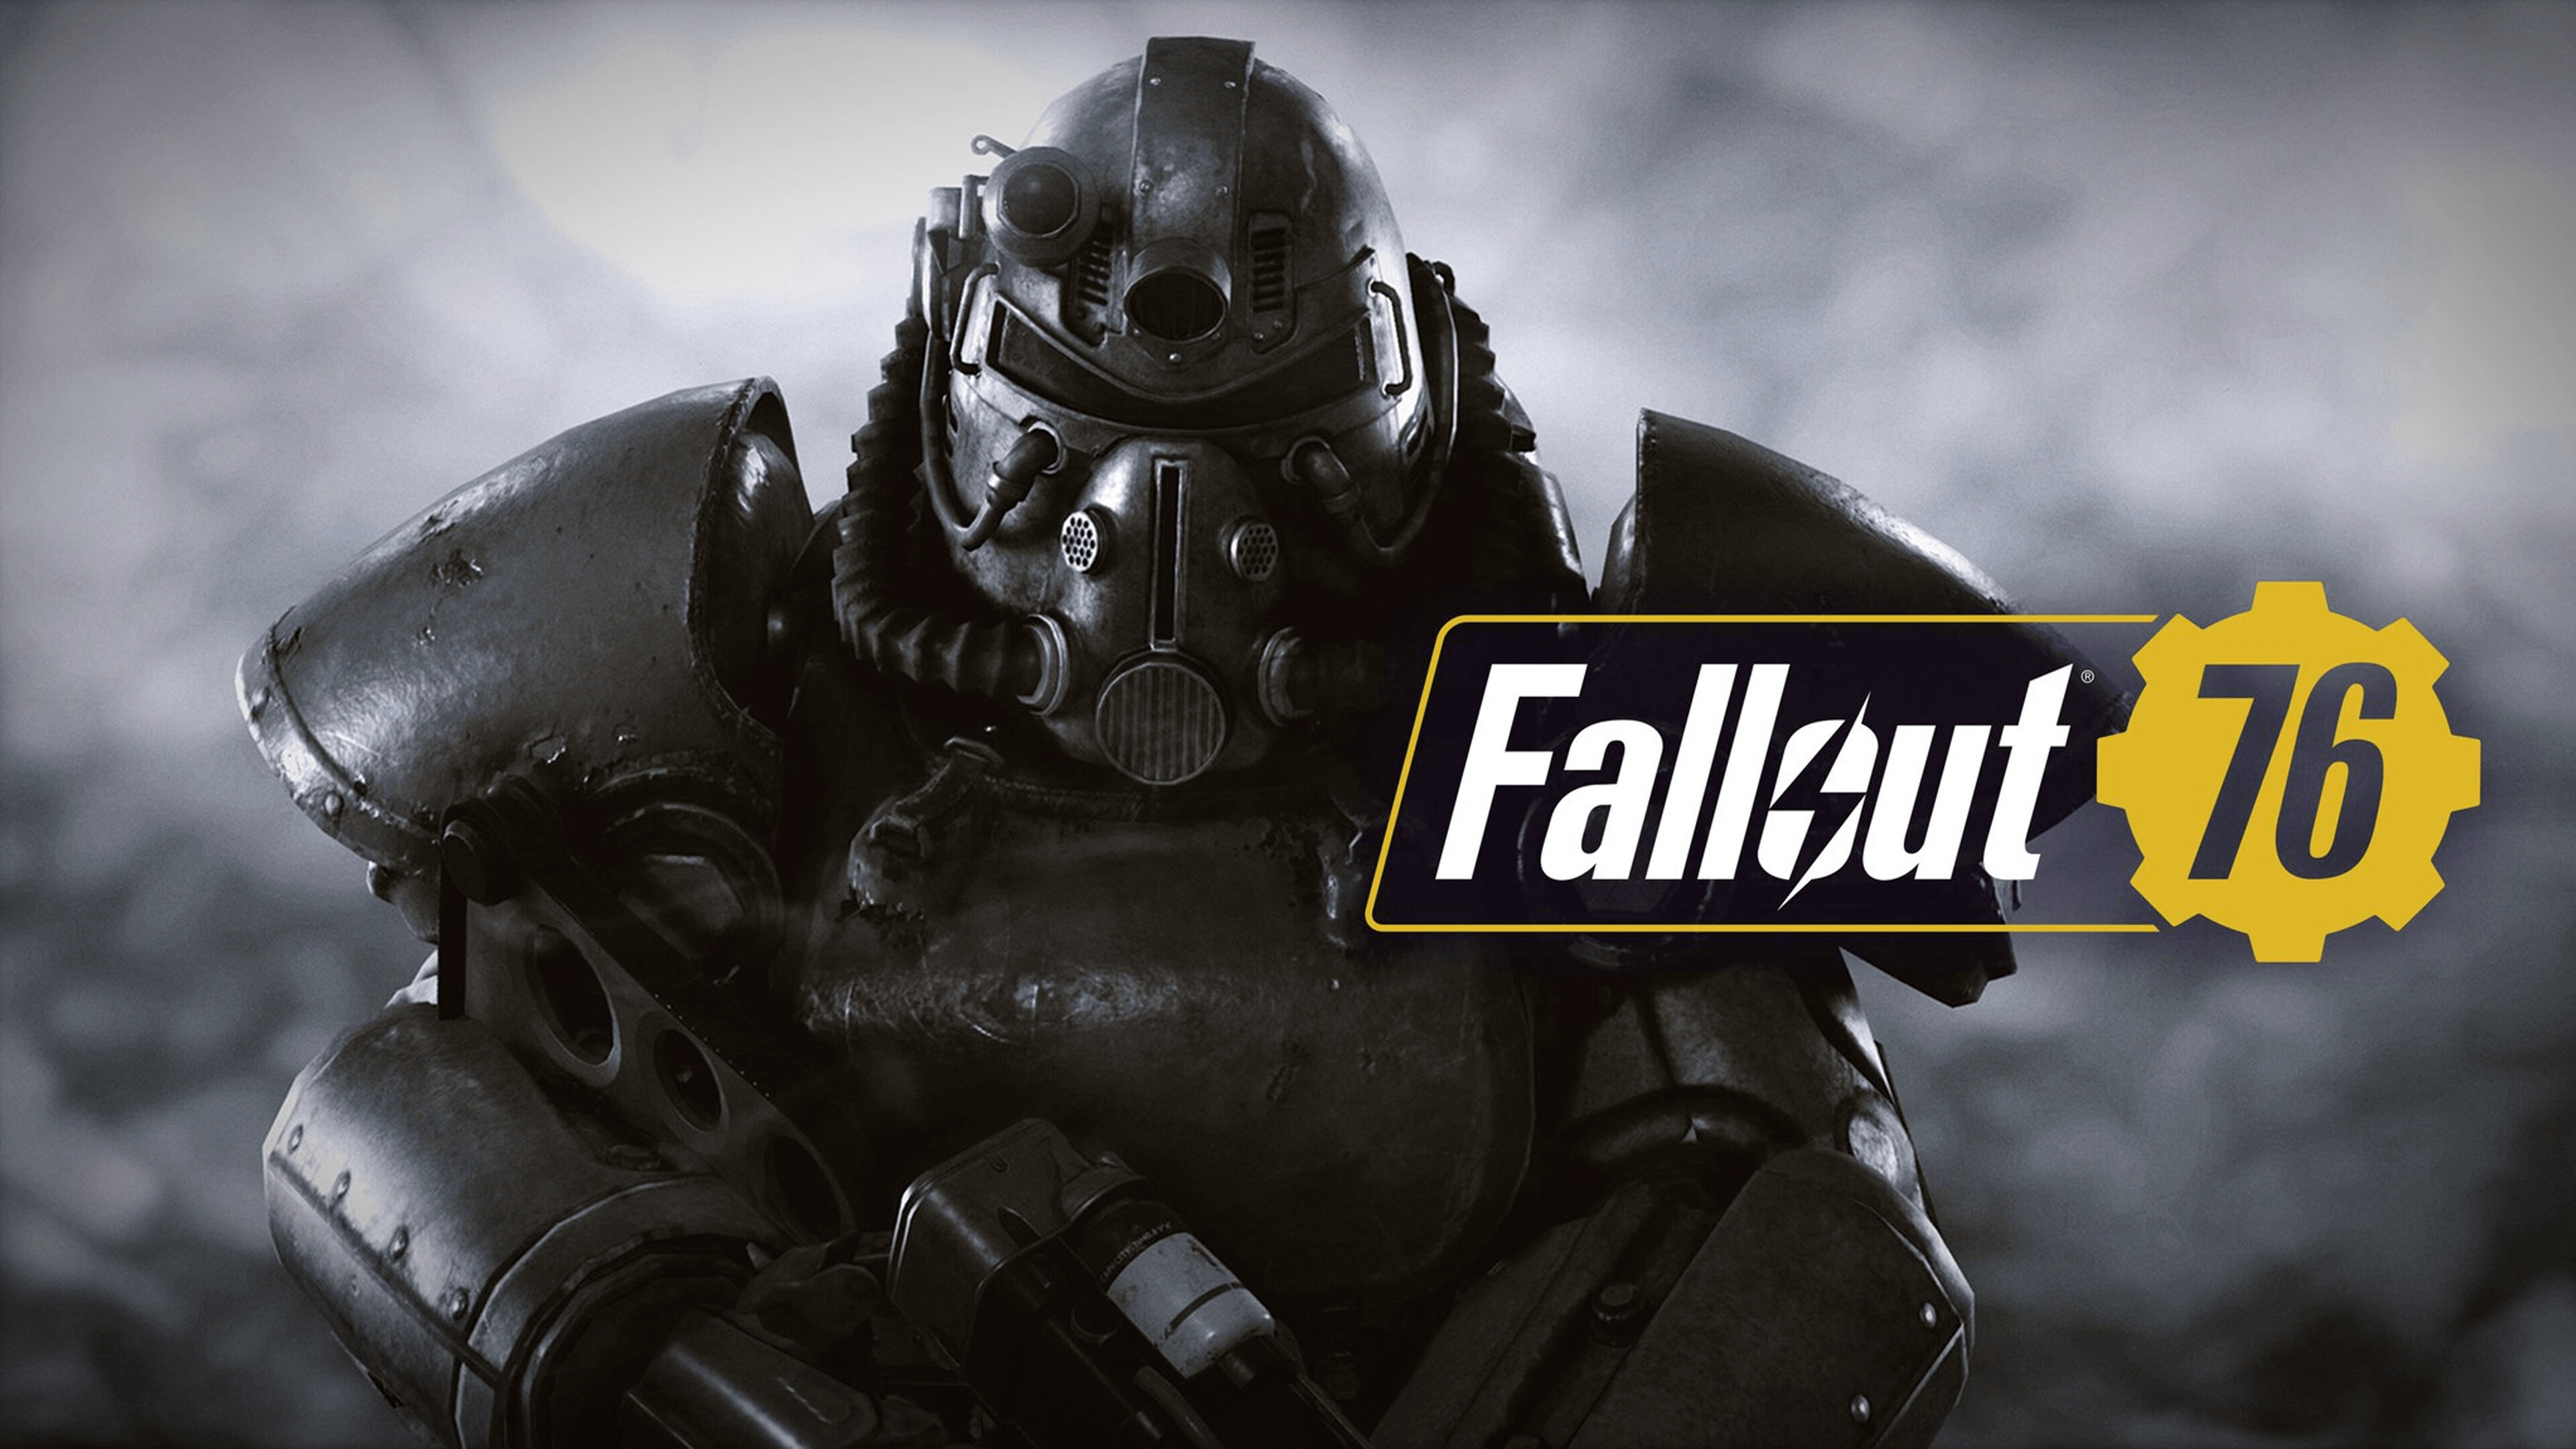 Fallout: A 2018 online action role-playing video game developed by Bethesda Game Studios. 3840x2160 4K Wallpaper.